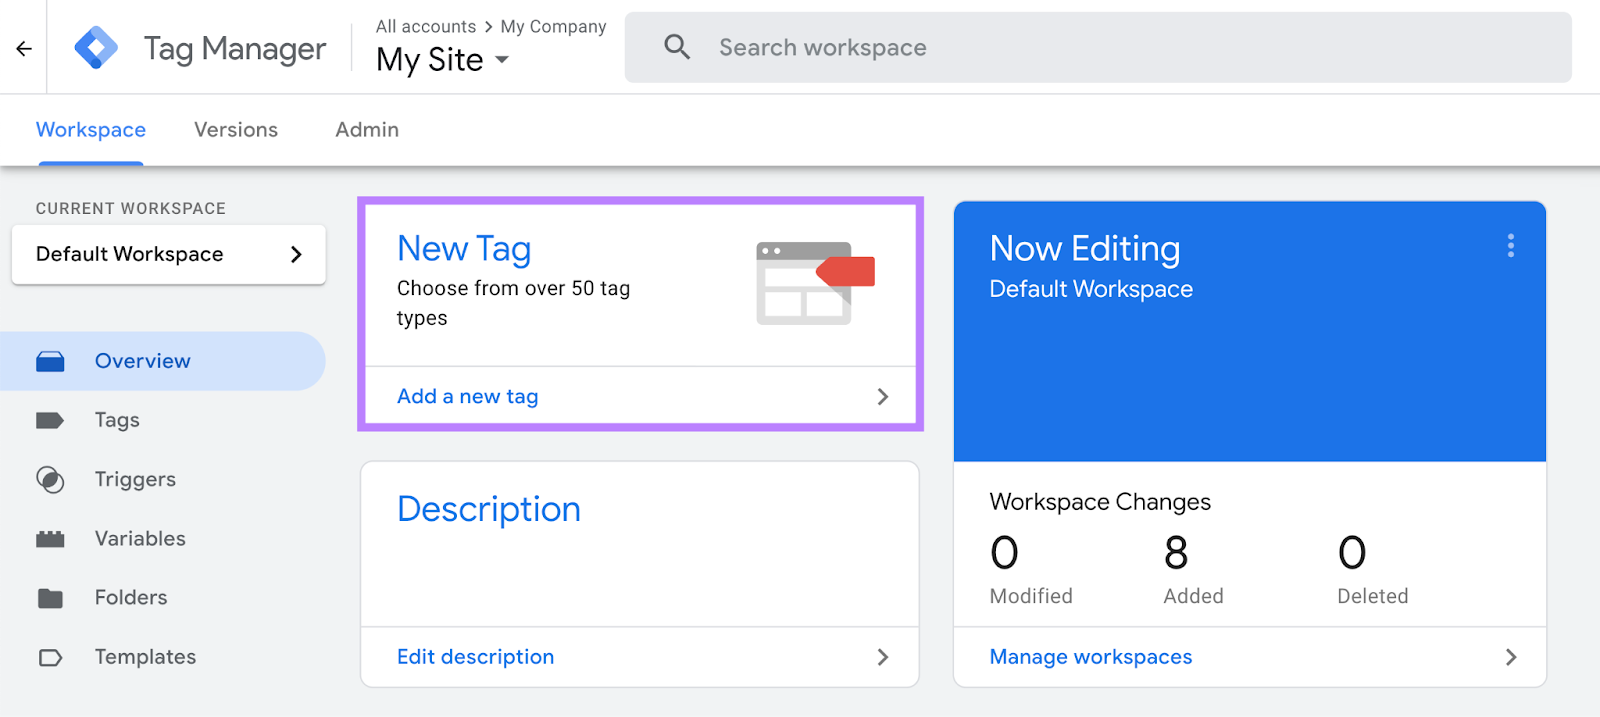 “Add a new tag" button in Tag Manager